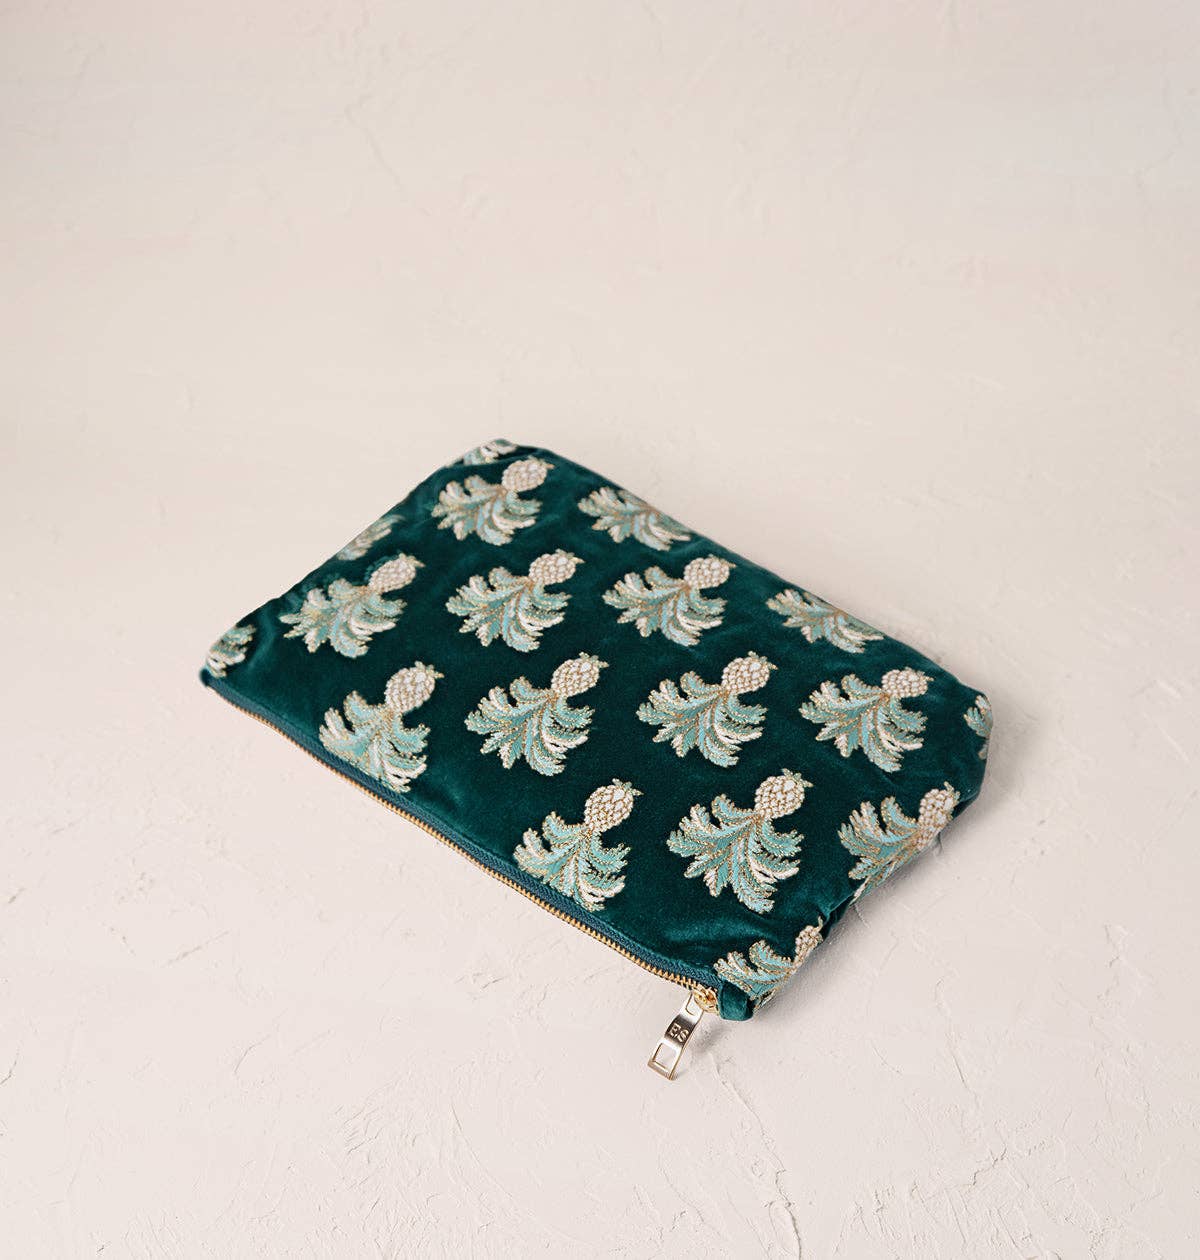 Pineapples Everyday Pouch, Emerald